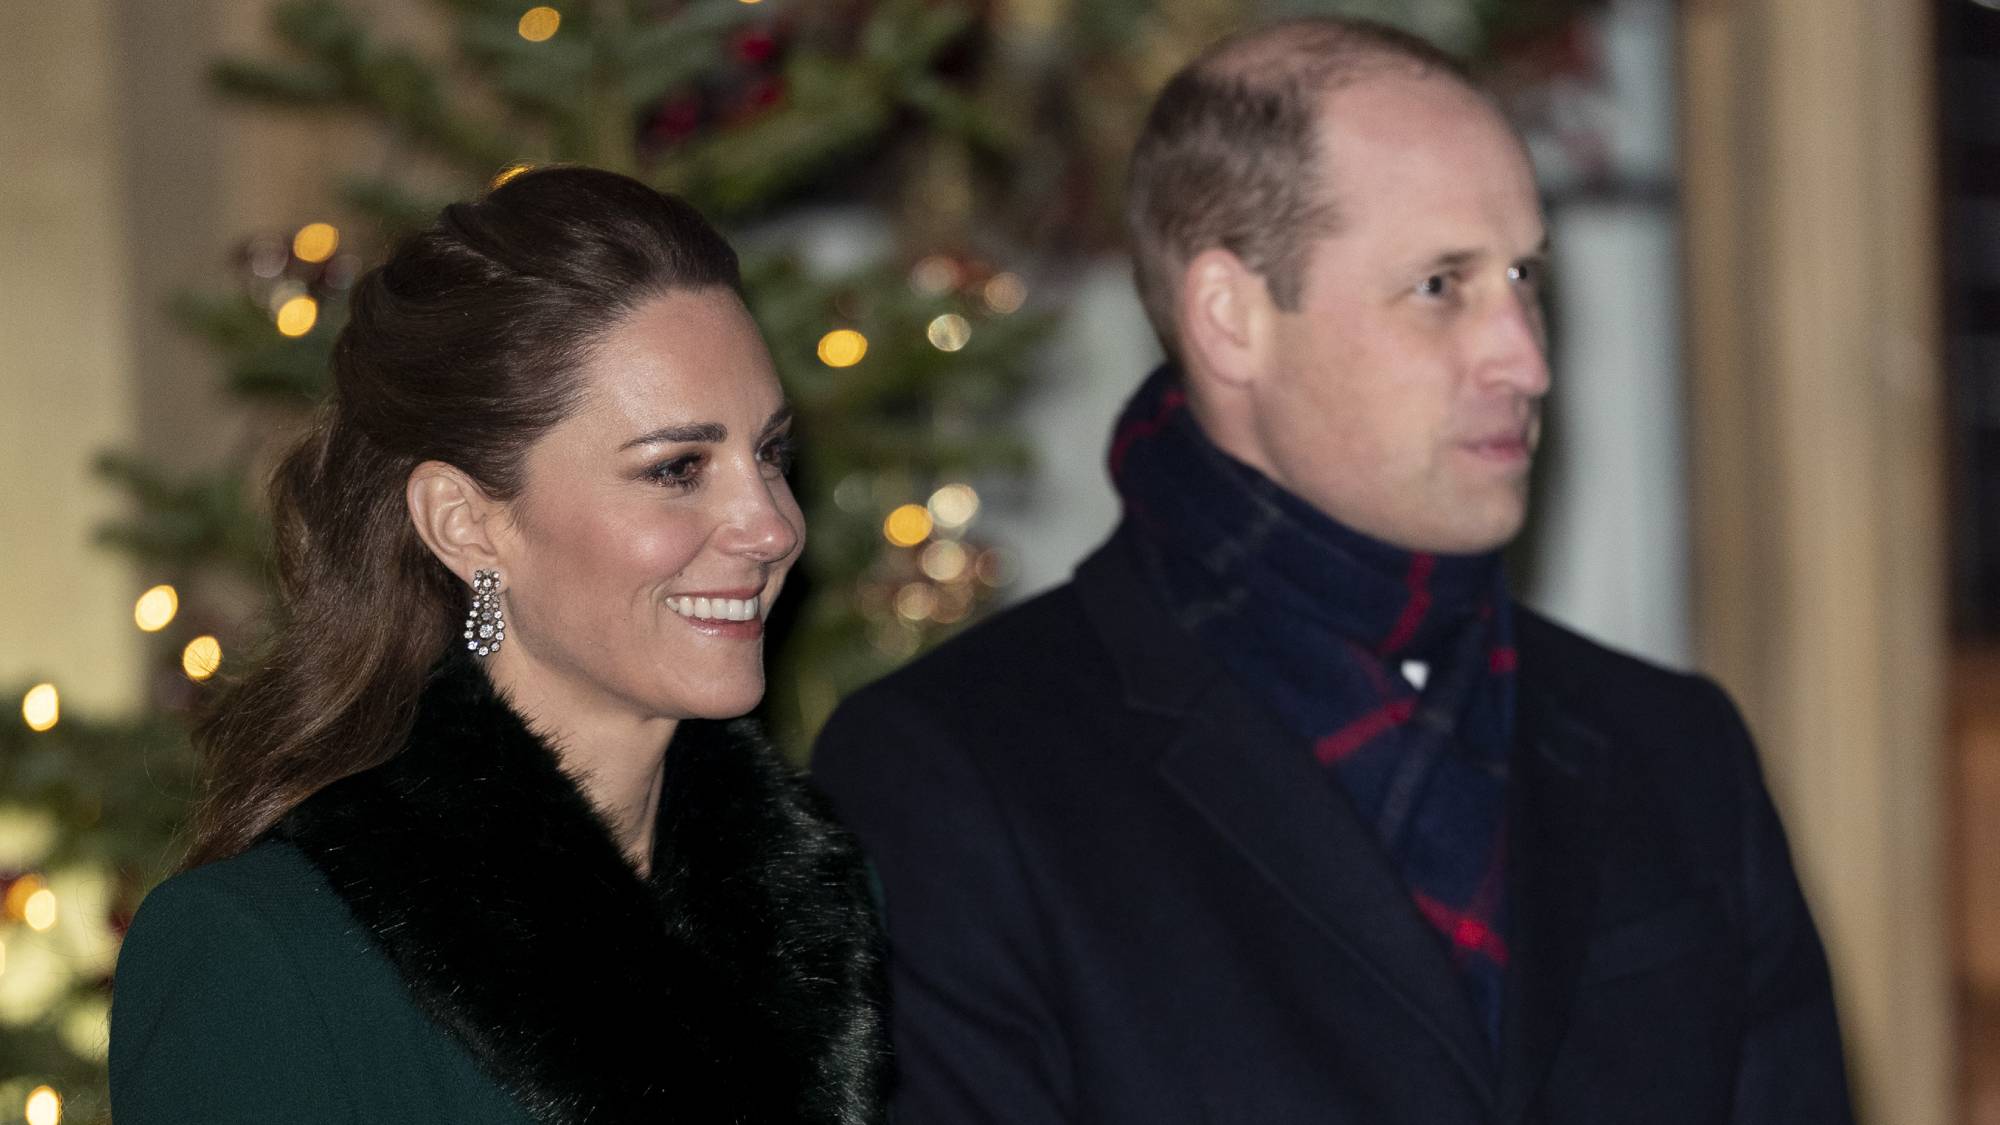 The Cambridges wear matching festive jumpers in their 2020 Christmas card